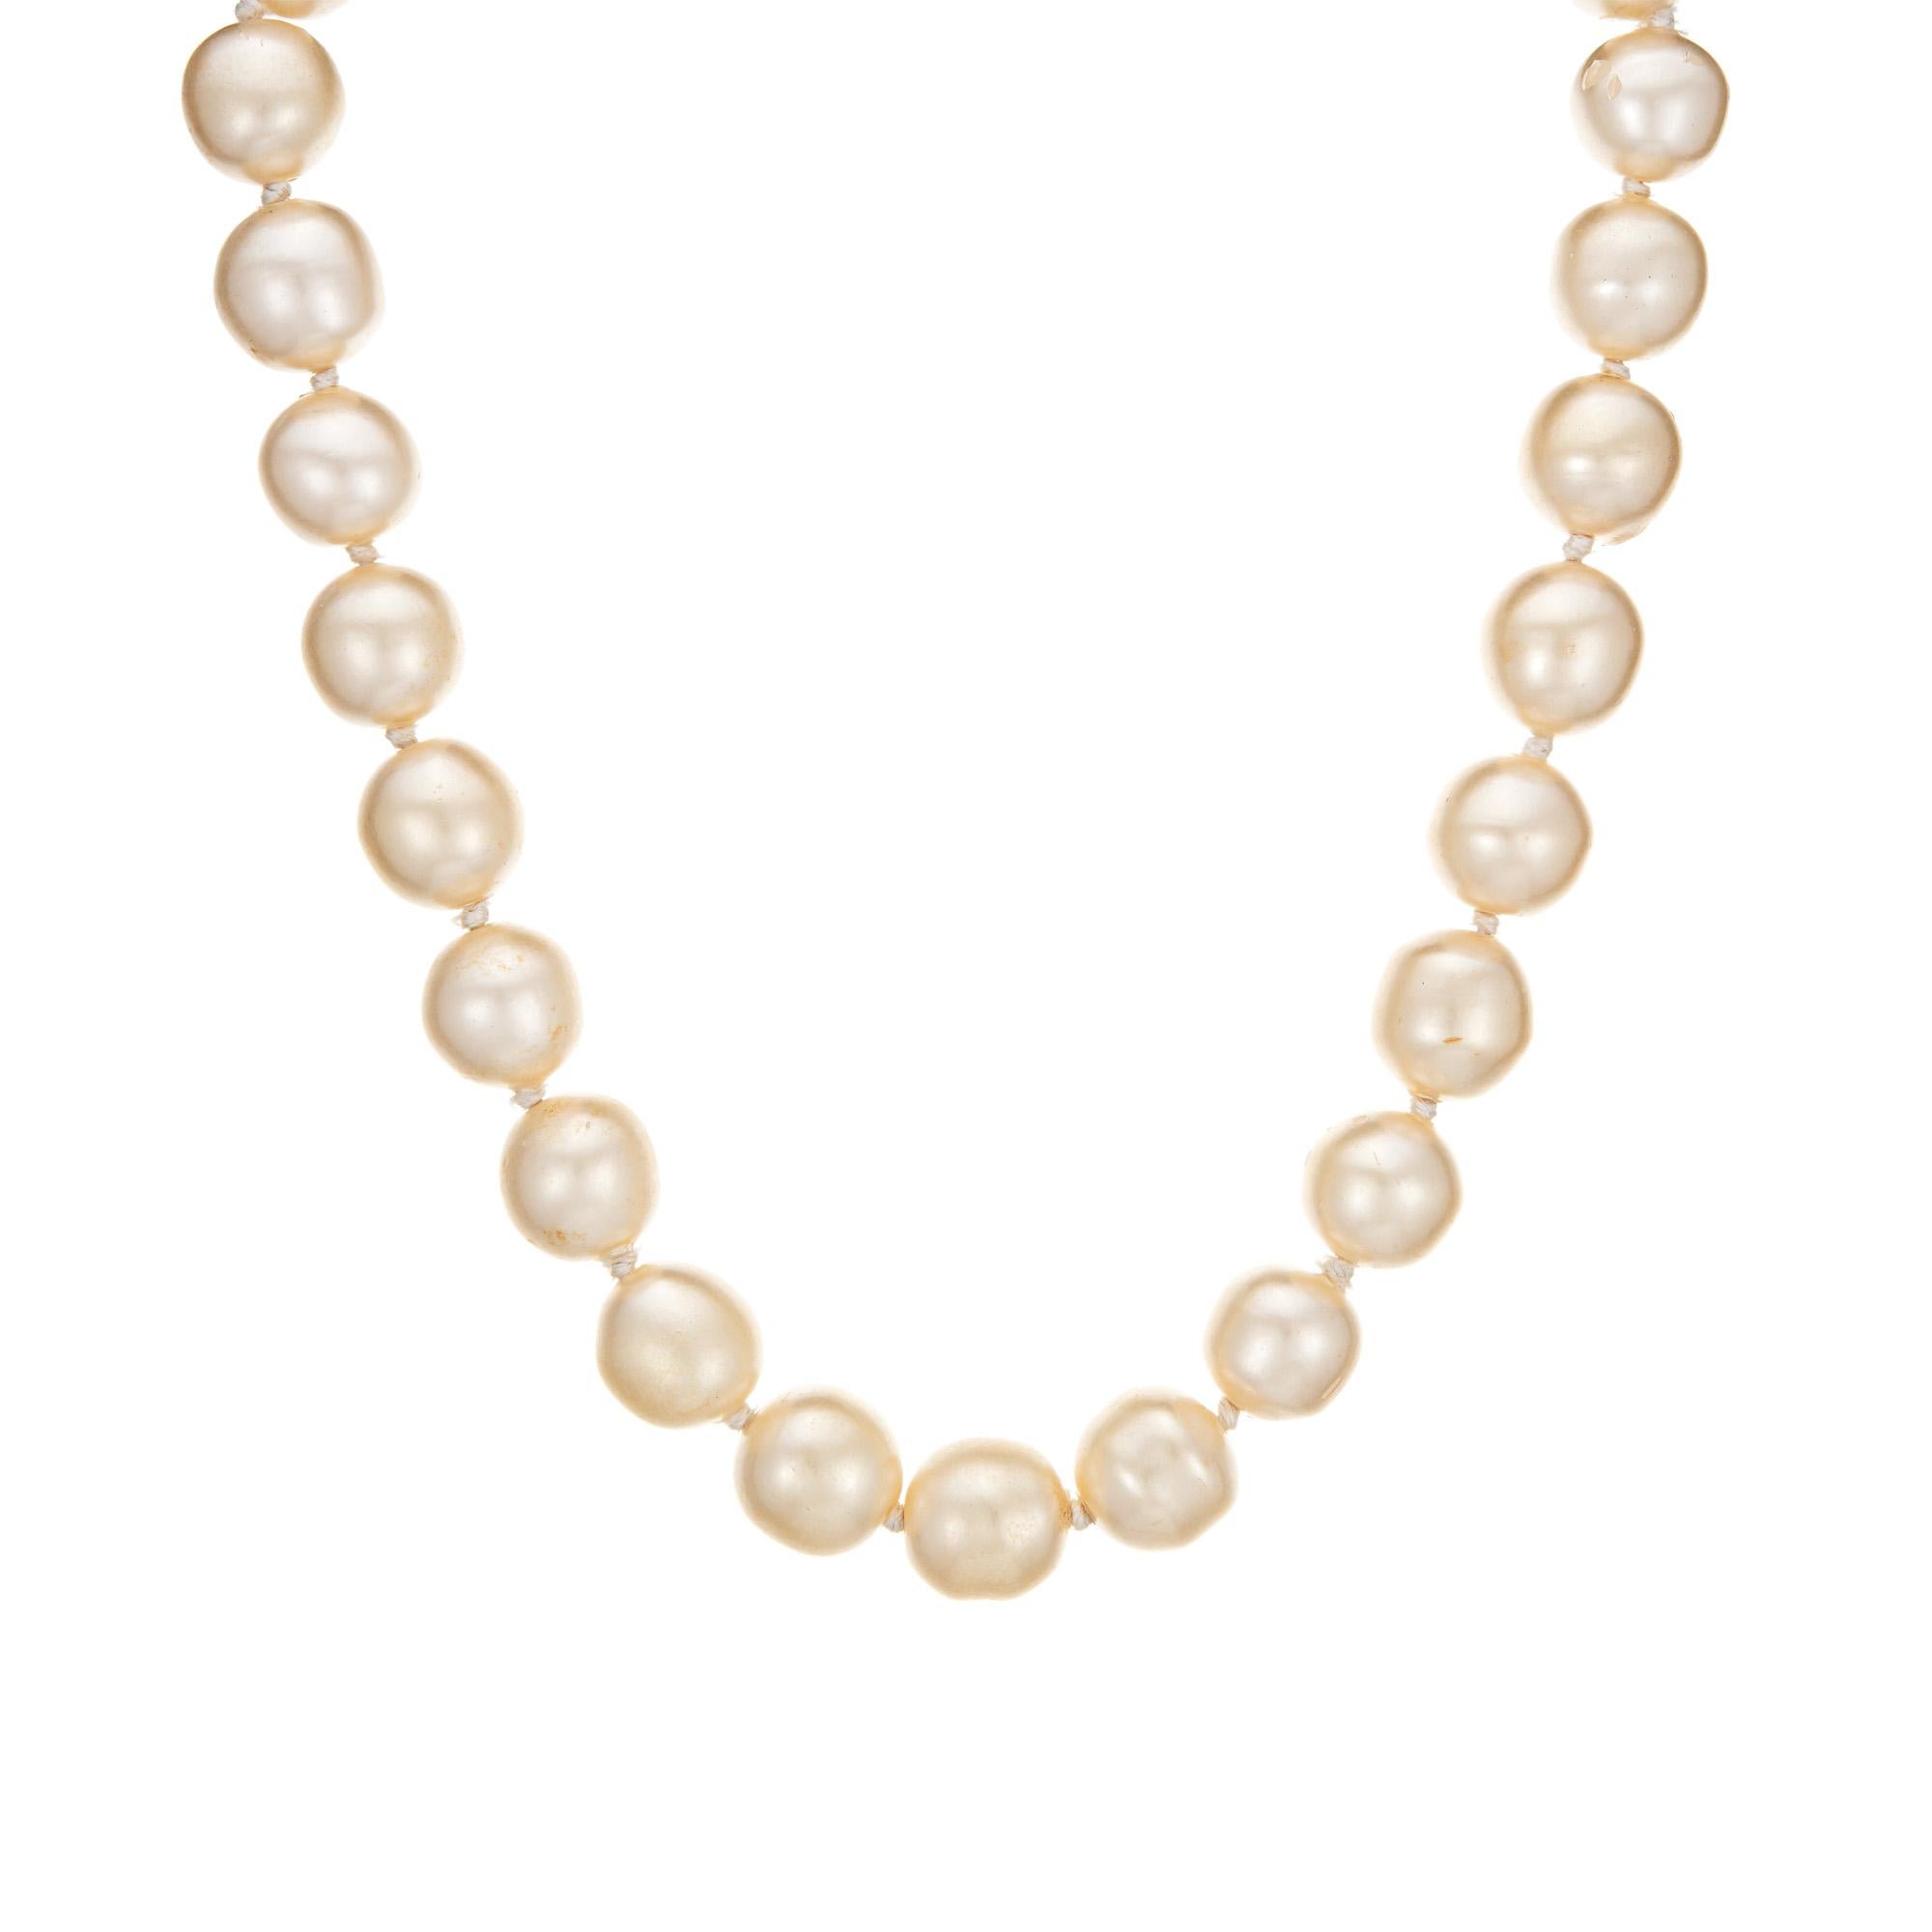 1995 Vintage Chanel Choker Necklace Large 14.5mm Faux Pearls Yellow Gold Tone  In Good Condition For Sale In Torrance, CA